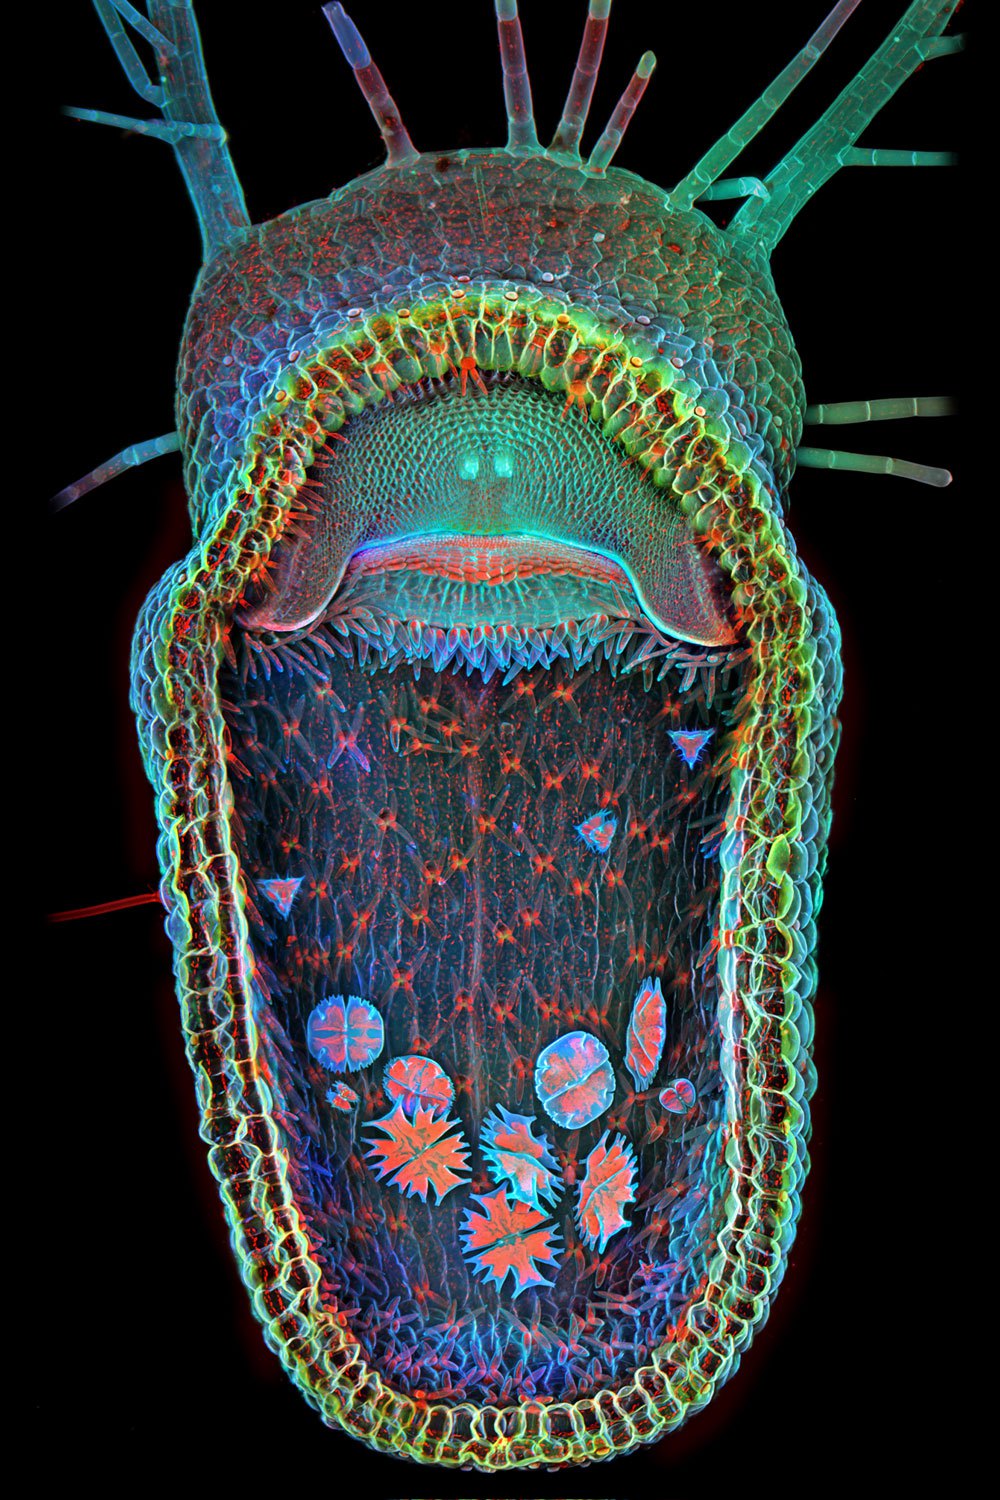 1st Place: Open trap of aquatic carnivorous plant, humped bladderwort (Utricularia gibba).